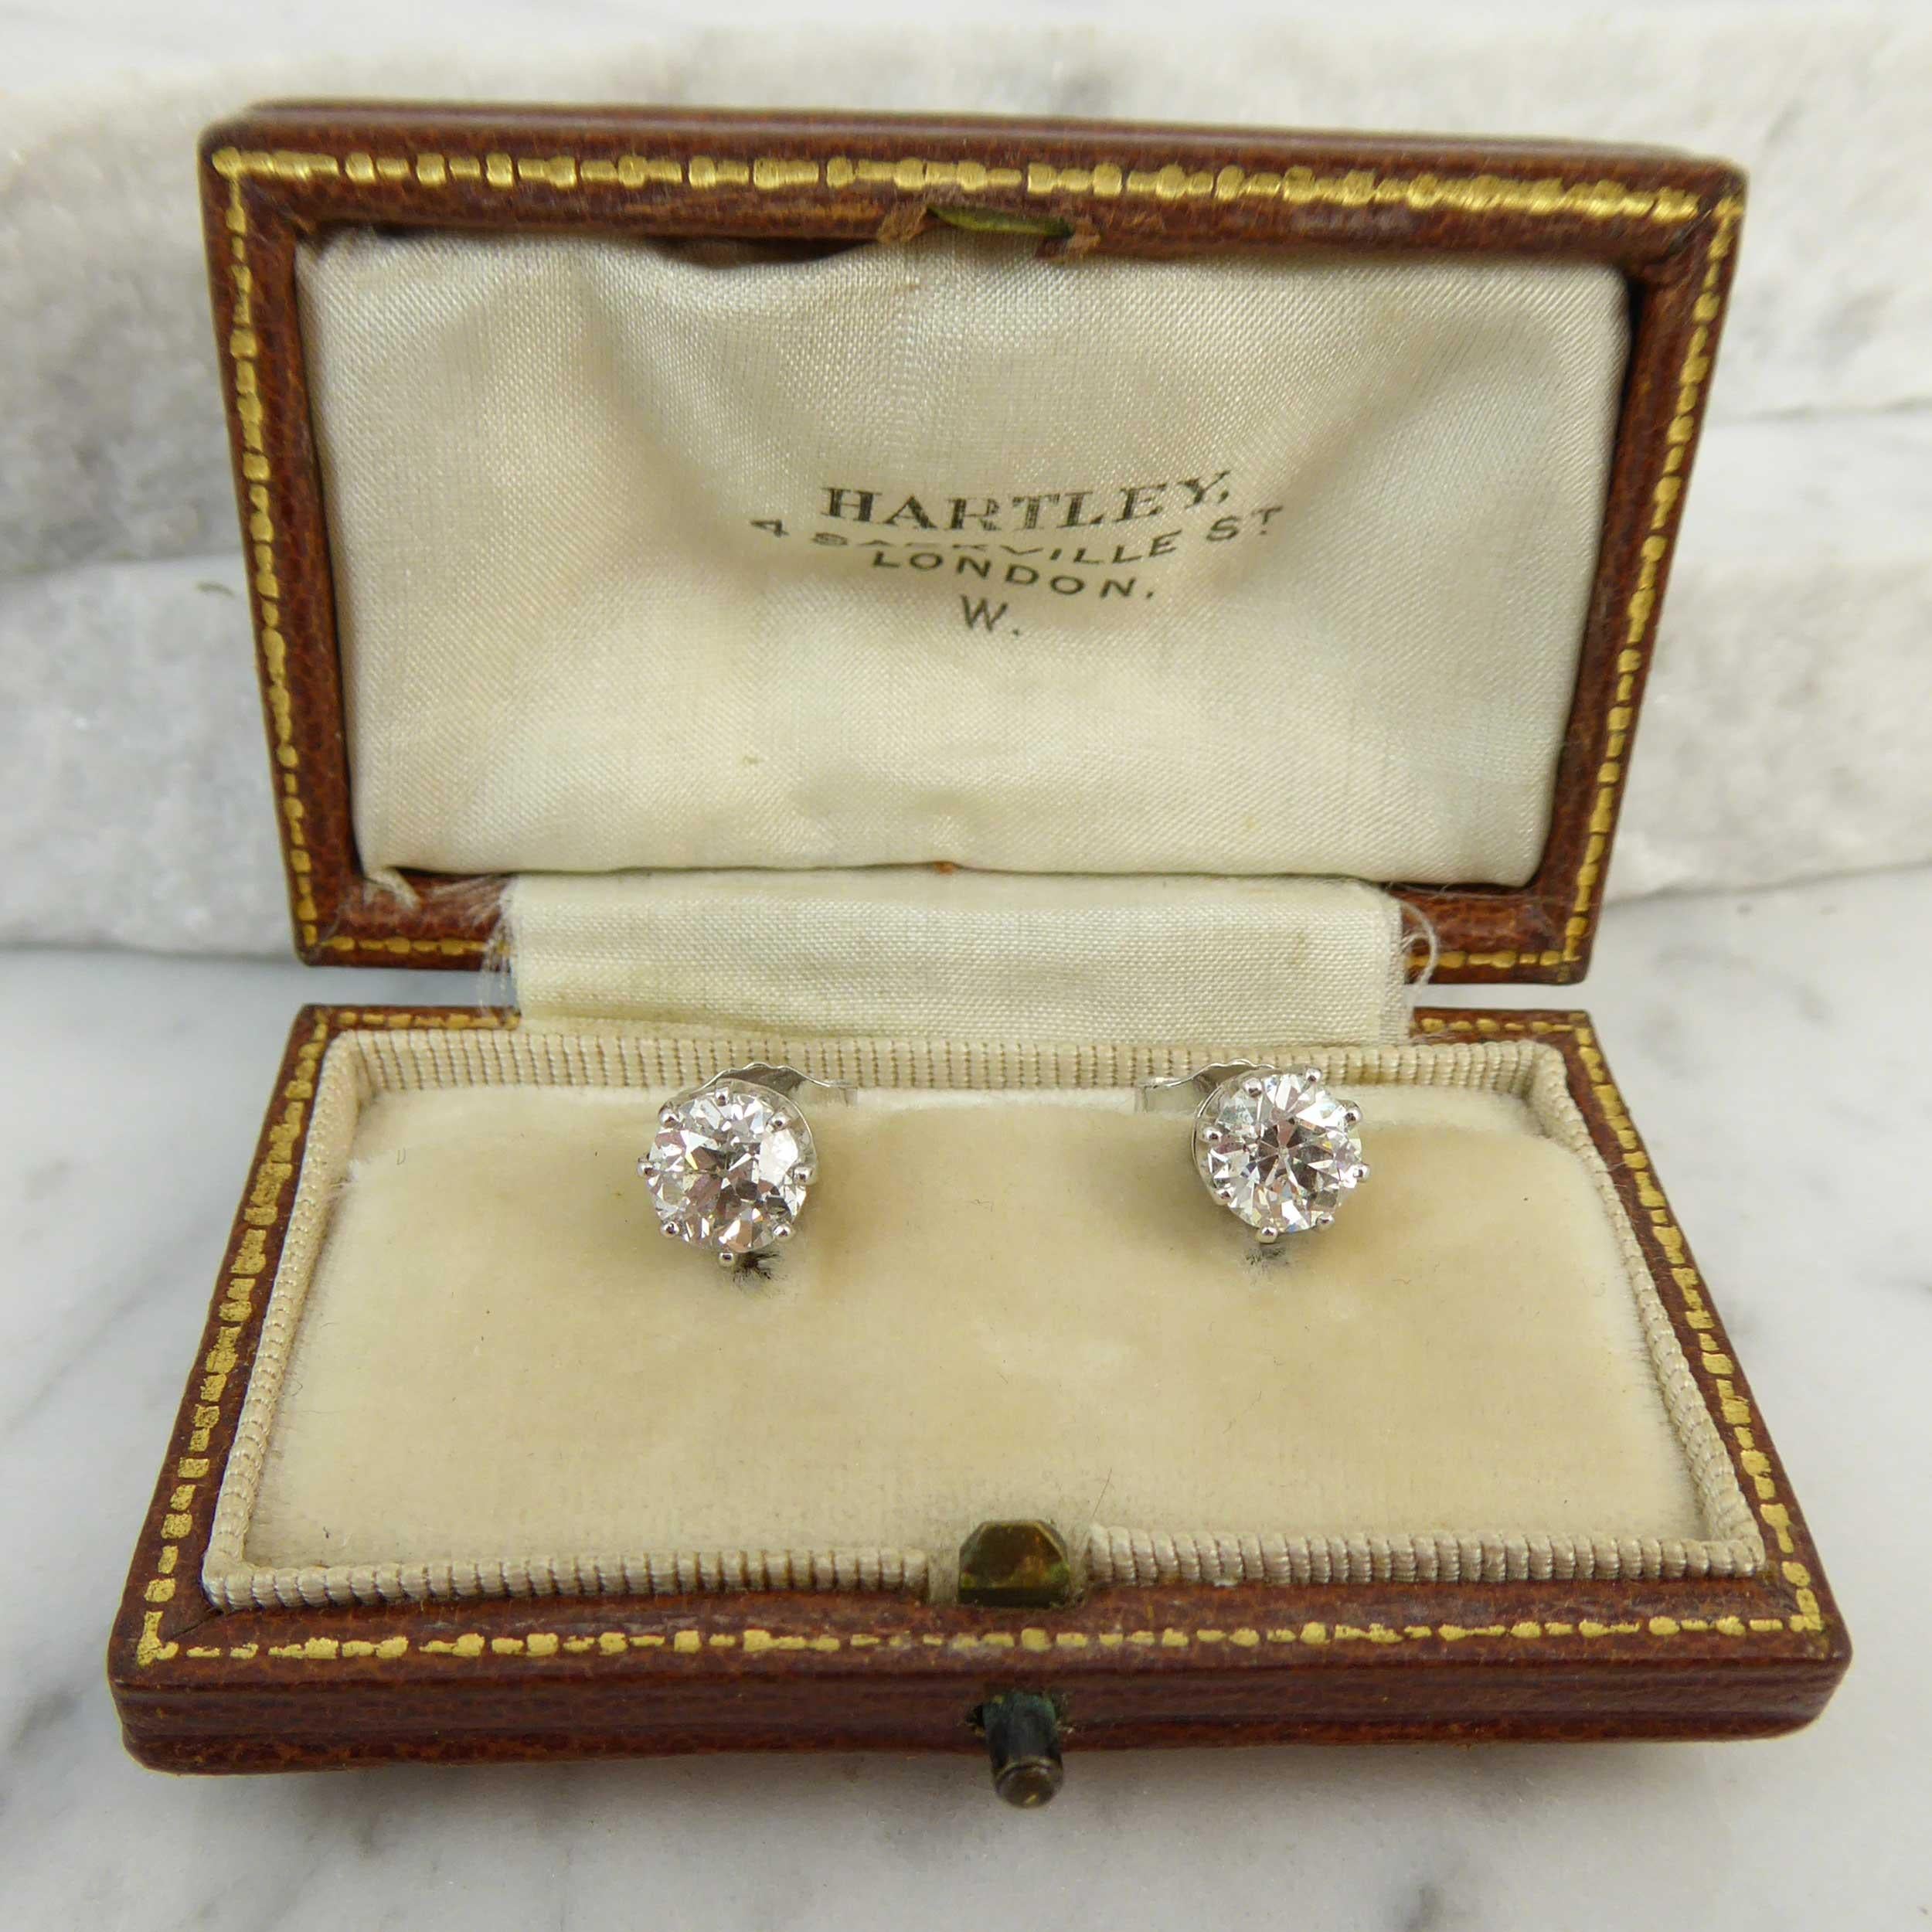 Antique old European cut diamonds form a pair of solitaire diamond stud earrings.  Each diamond is set within a classic white undulating gallery in an eight-prong mount and fitted with post and butterfly fittings for pierced ears.  The diamonds